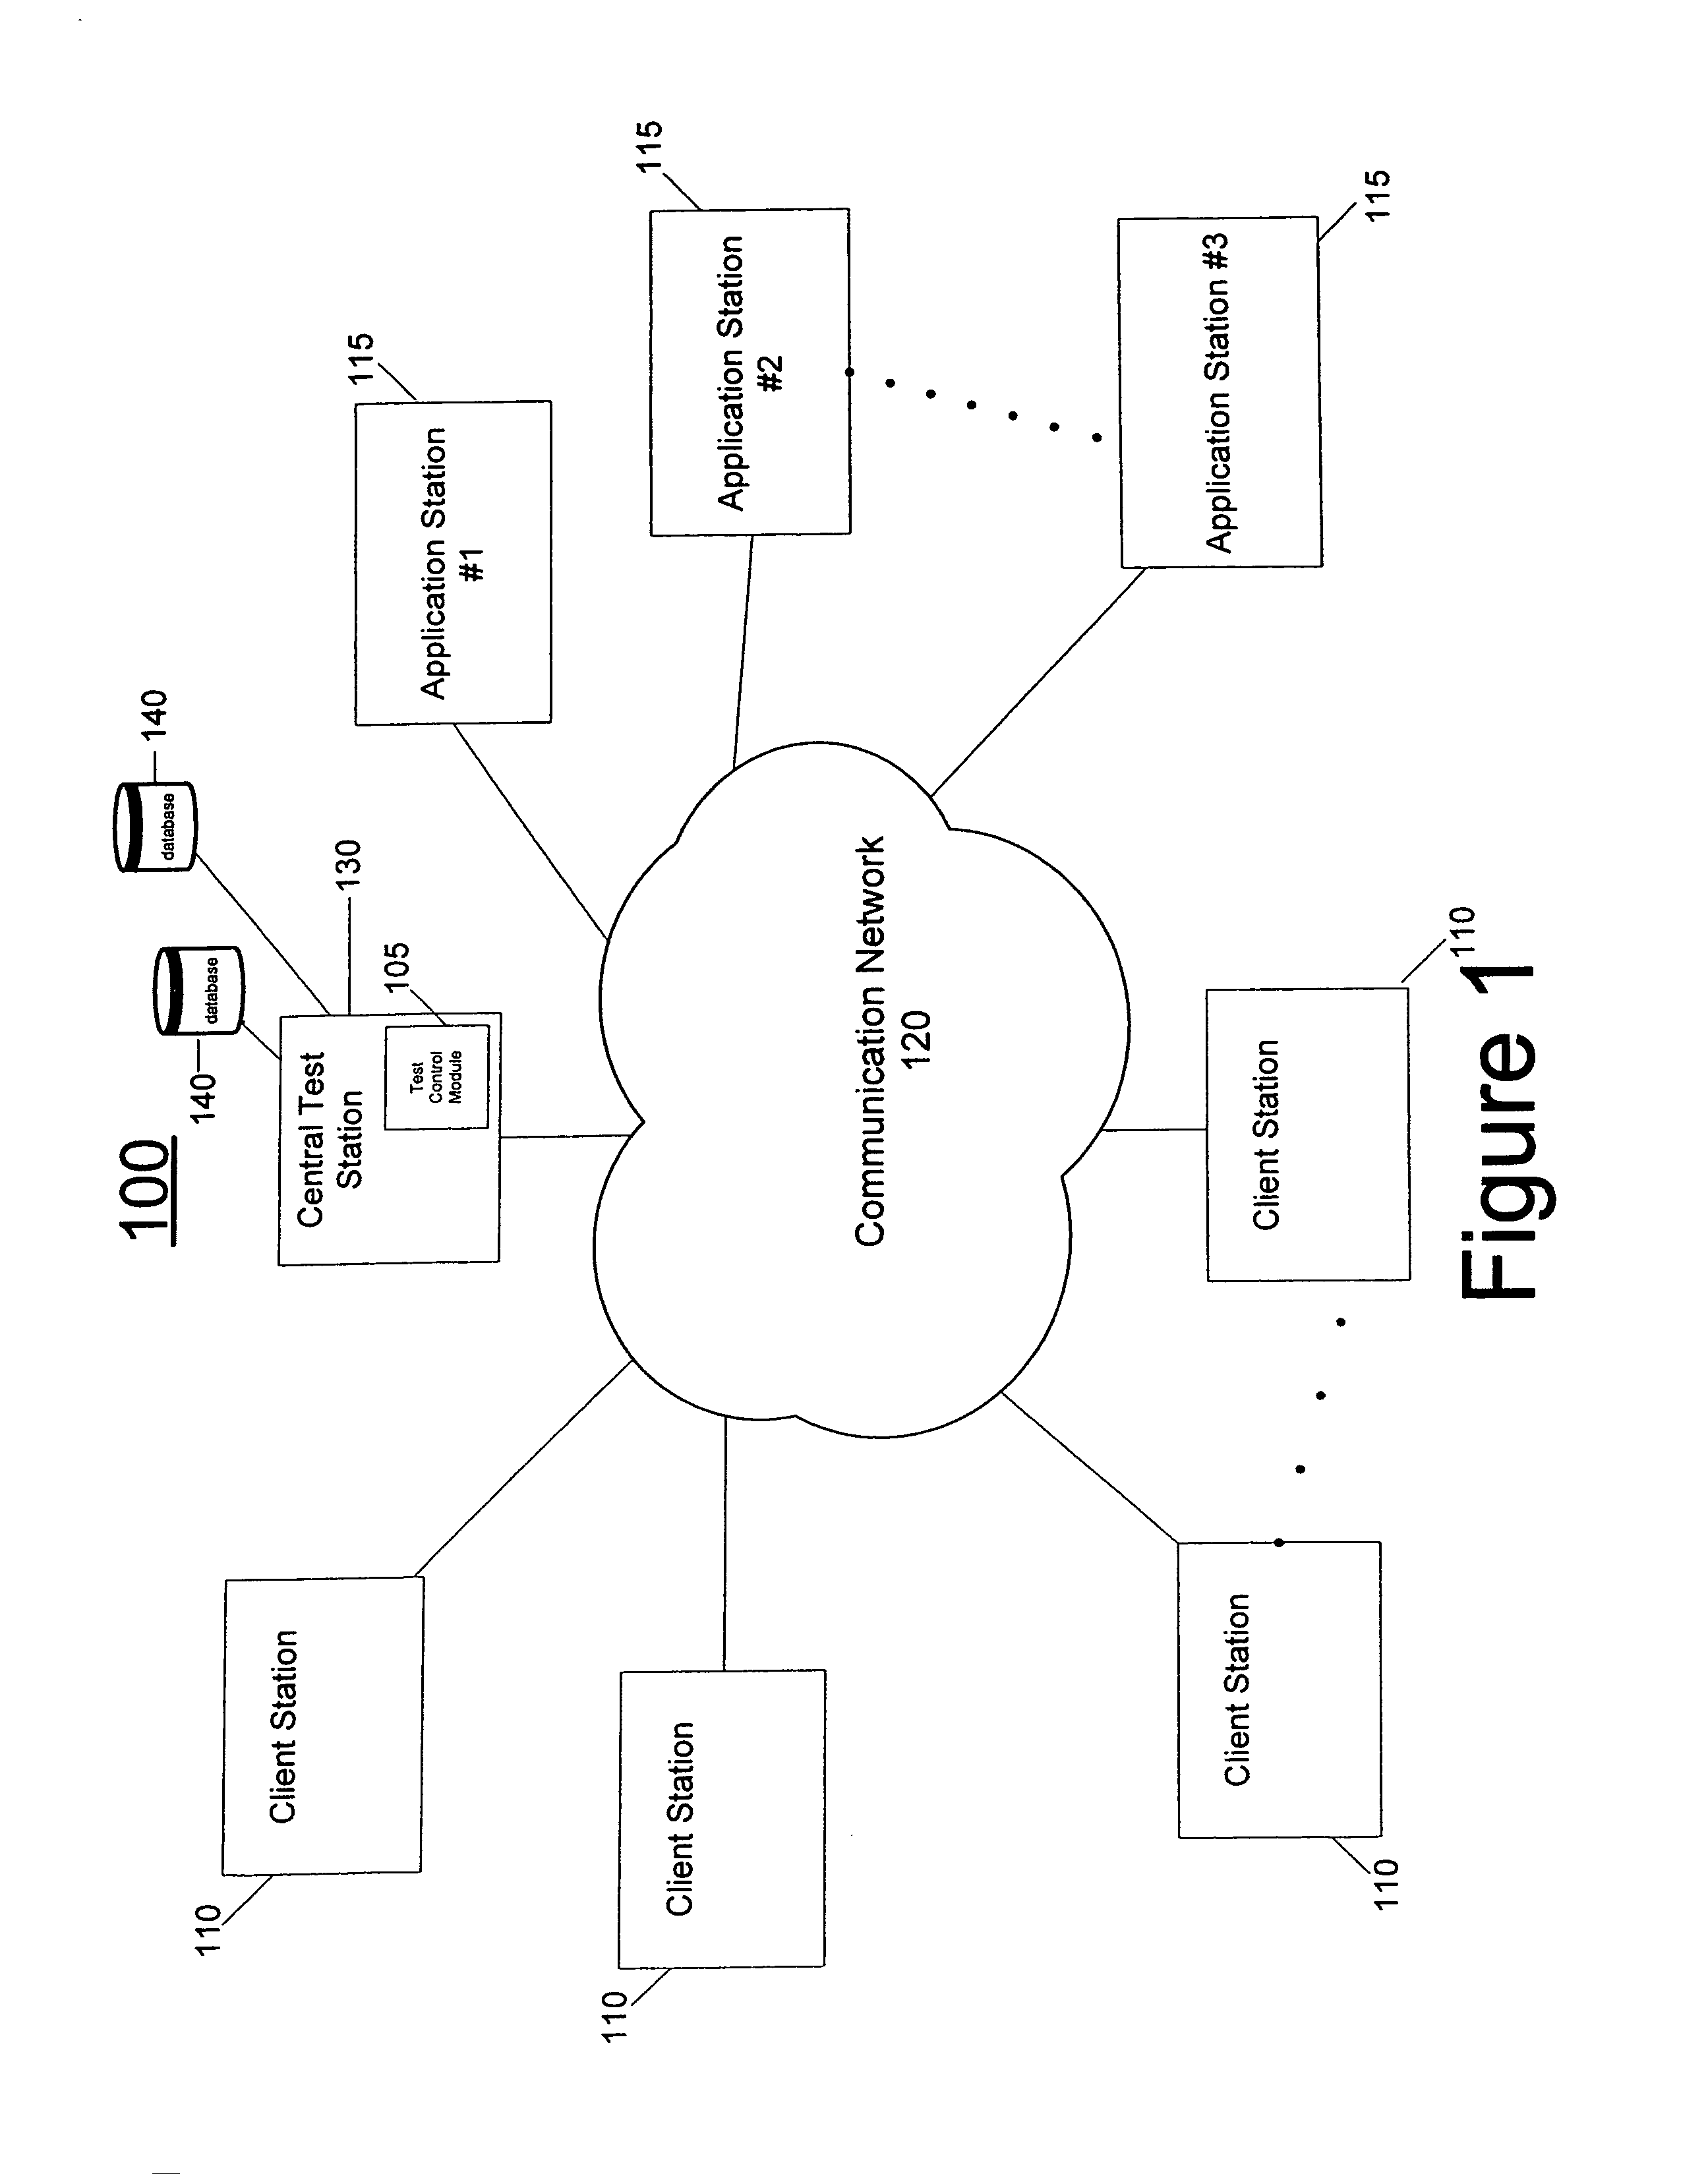 System and method for testing applications